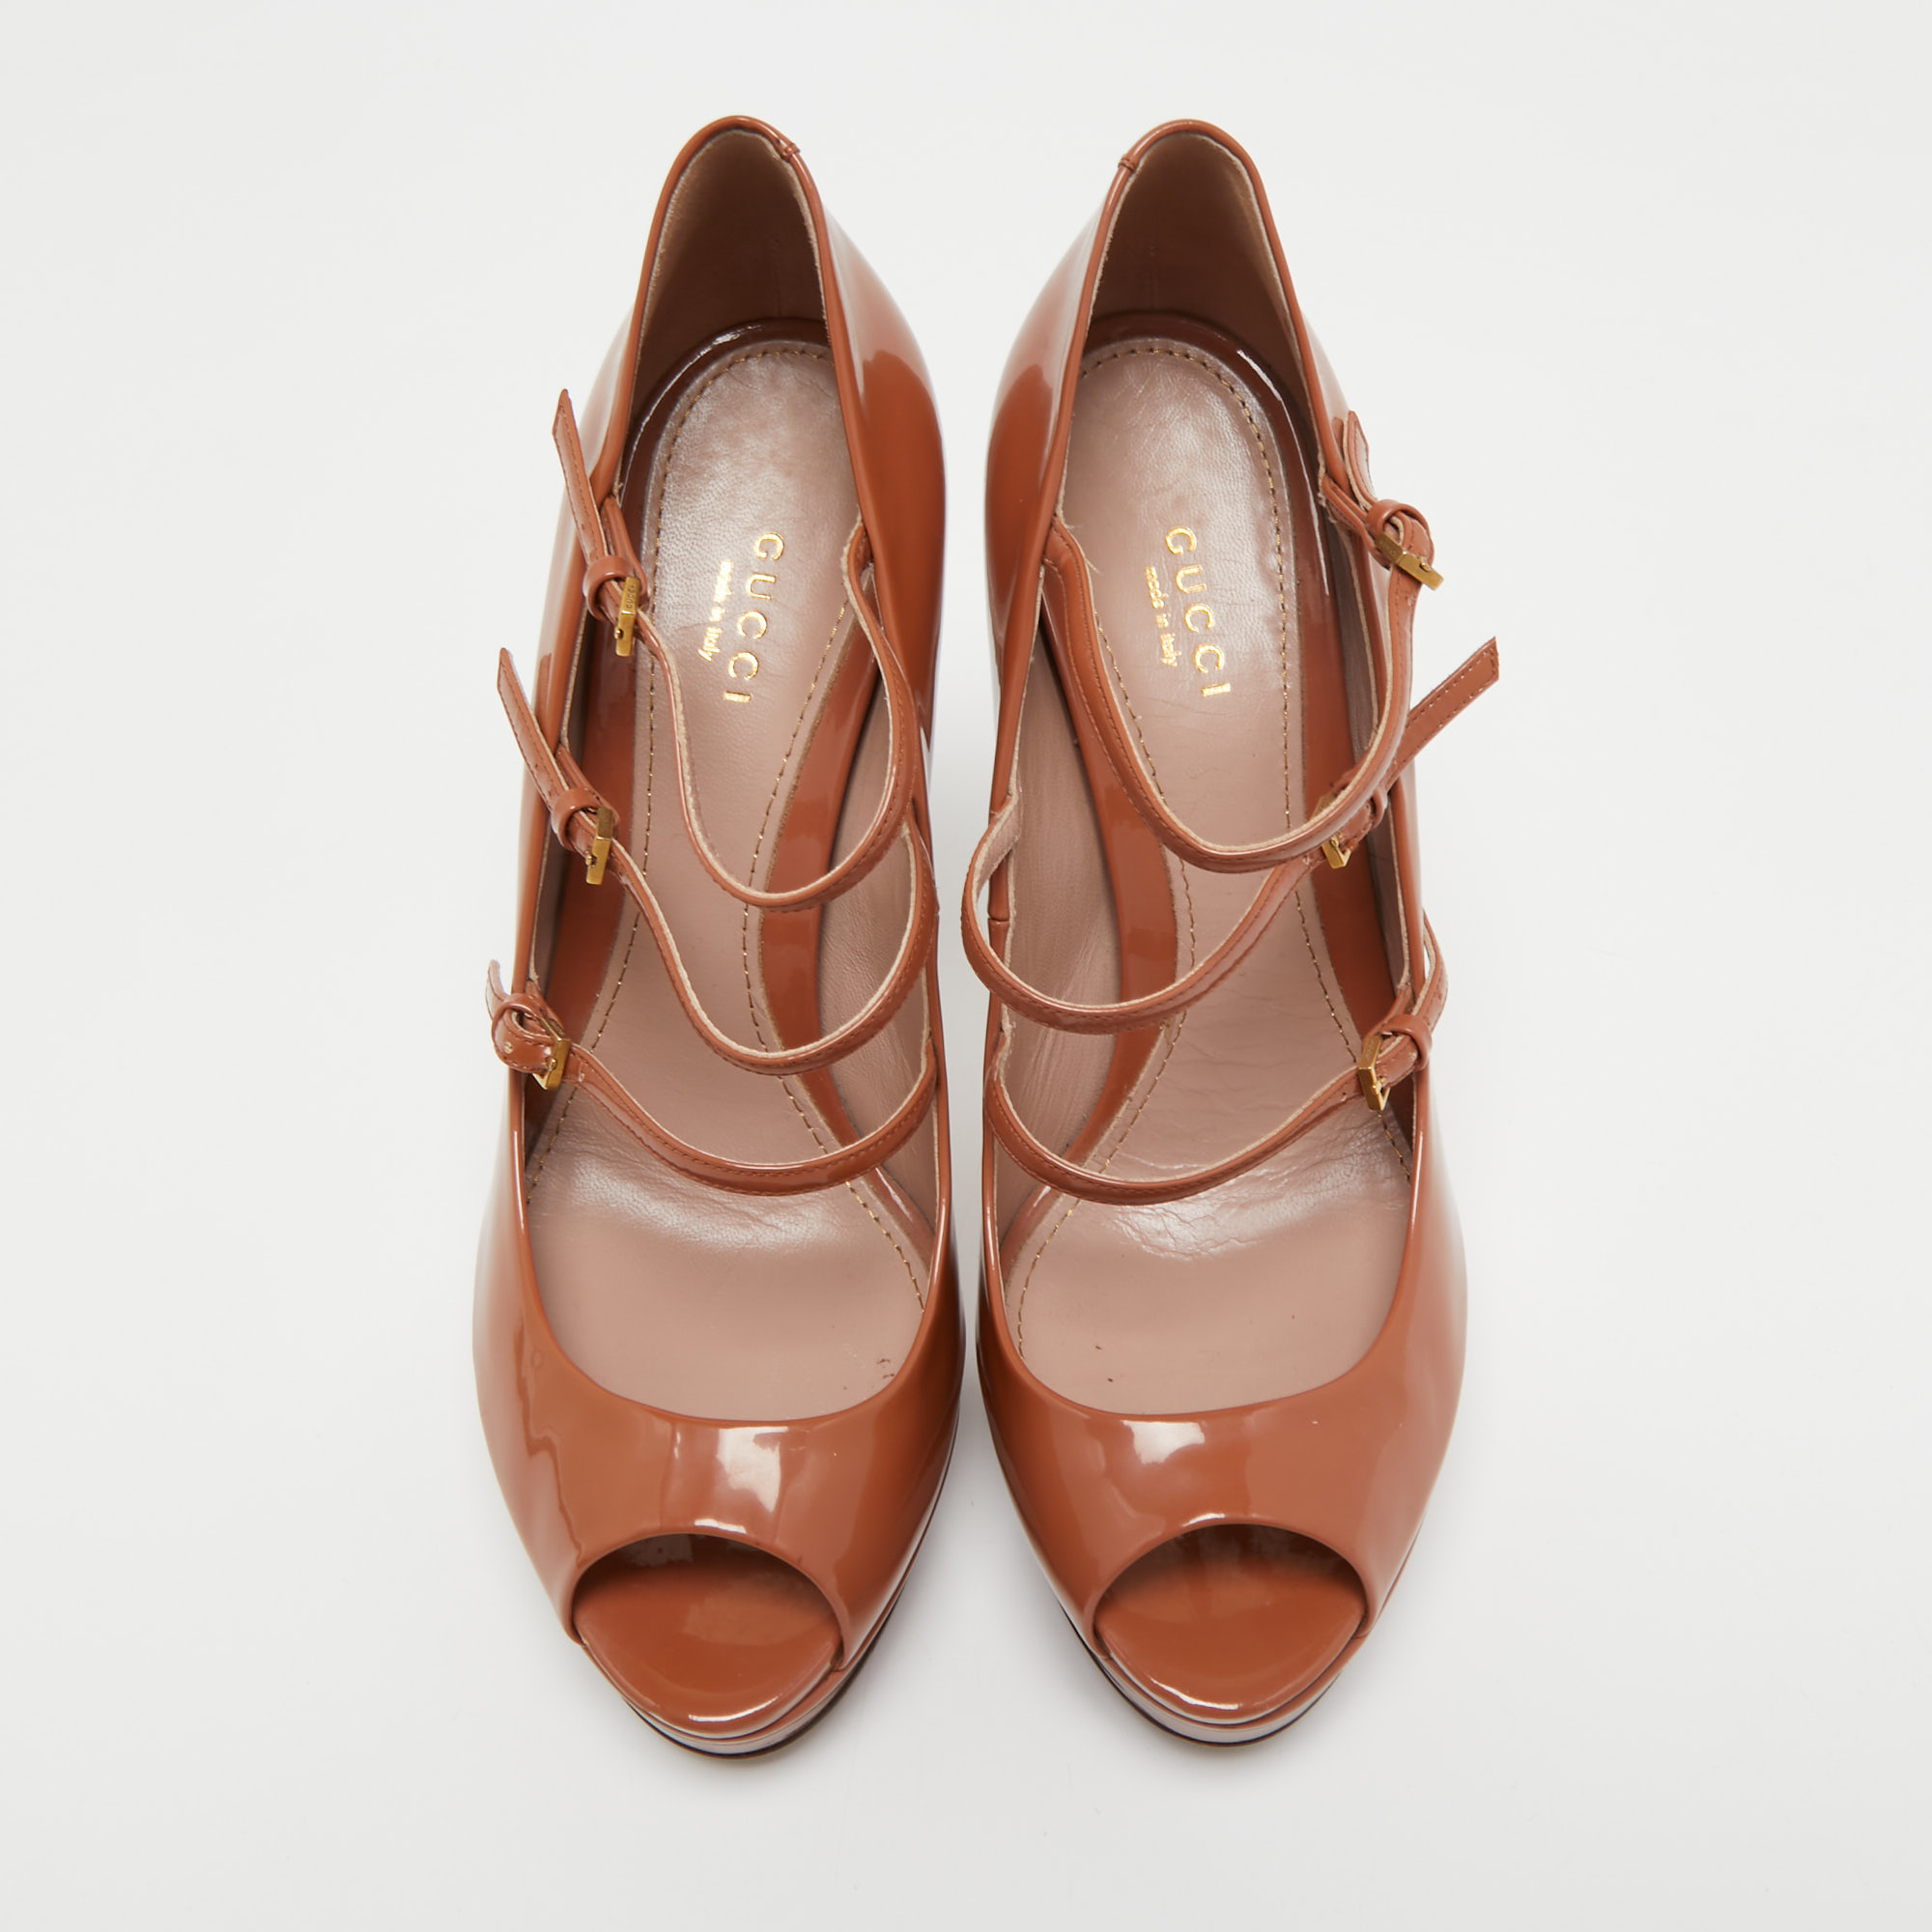 Gucci Brown Patent Leather Lisbeth Peep Toe Pumps Size 39.5